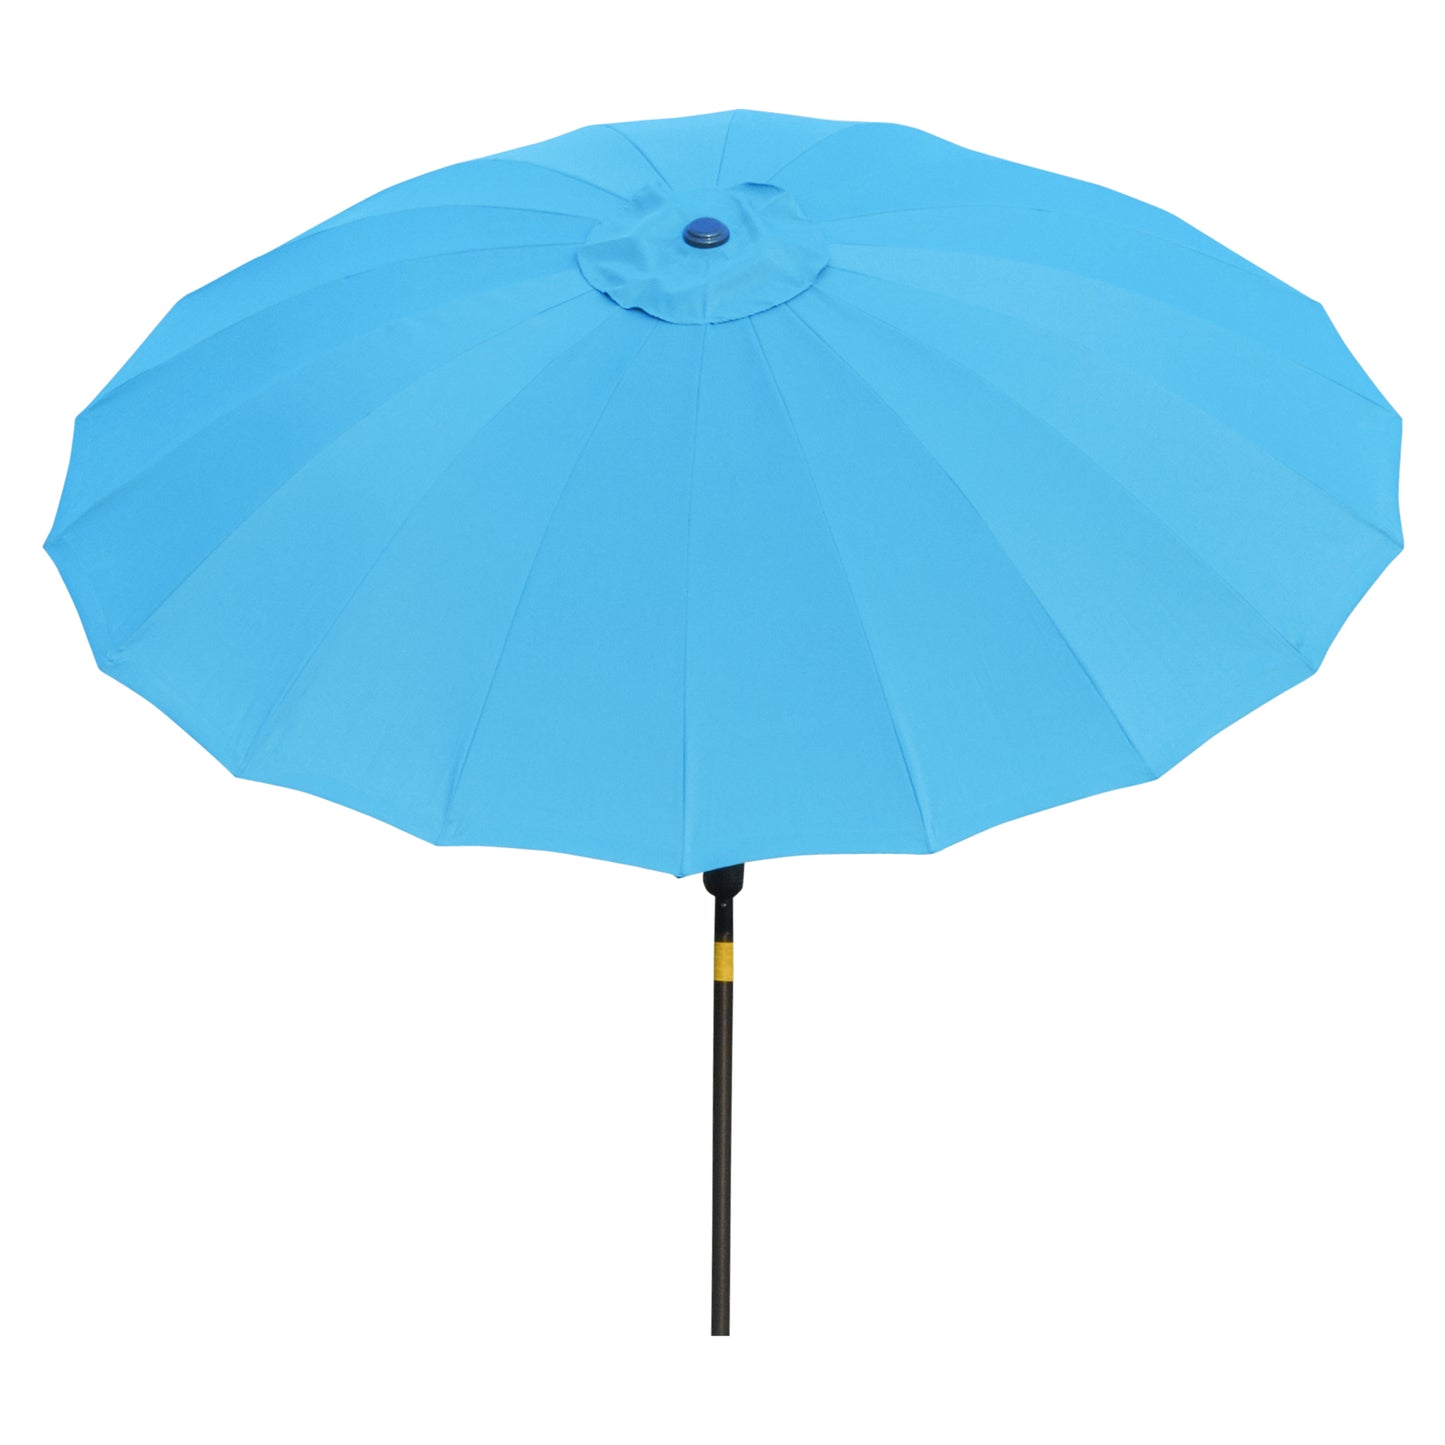 Outsunny Ф255cm Patio Parasol Umbrella Outdoor Market Table Parasol with Push Button Tilt Crank and 18 Sturdy Ribs for Garden Lawn Backyard Pool Blue Adjustable Angle Detachable Structure